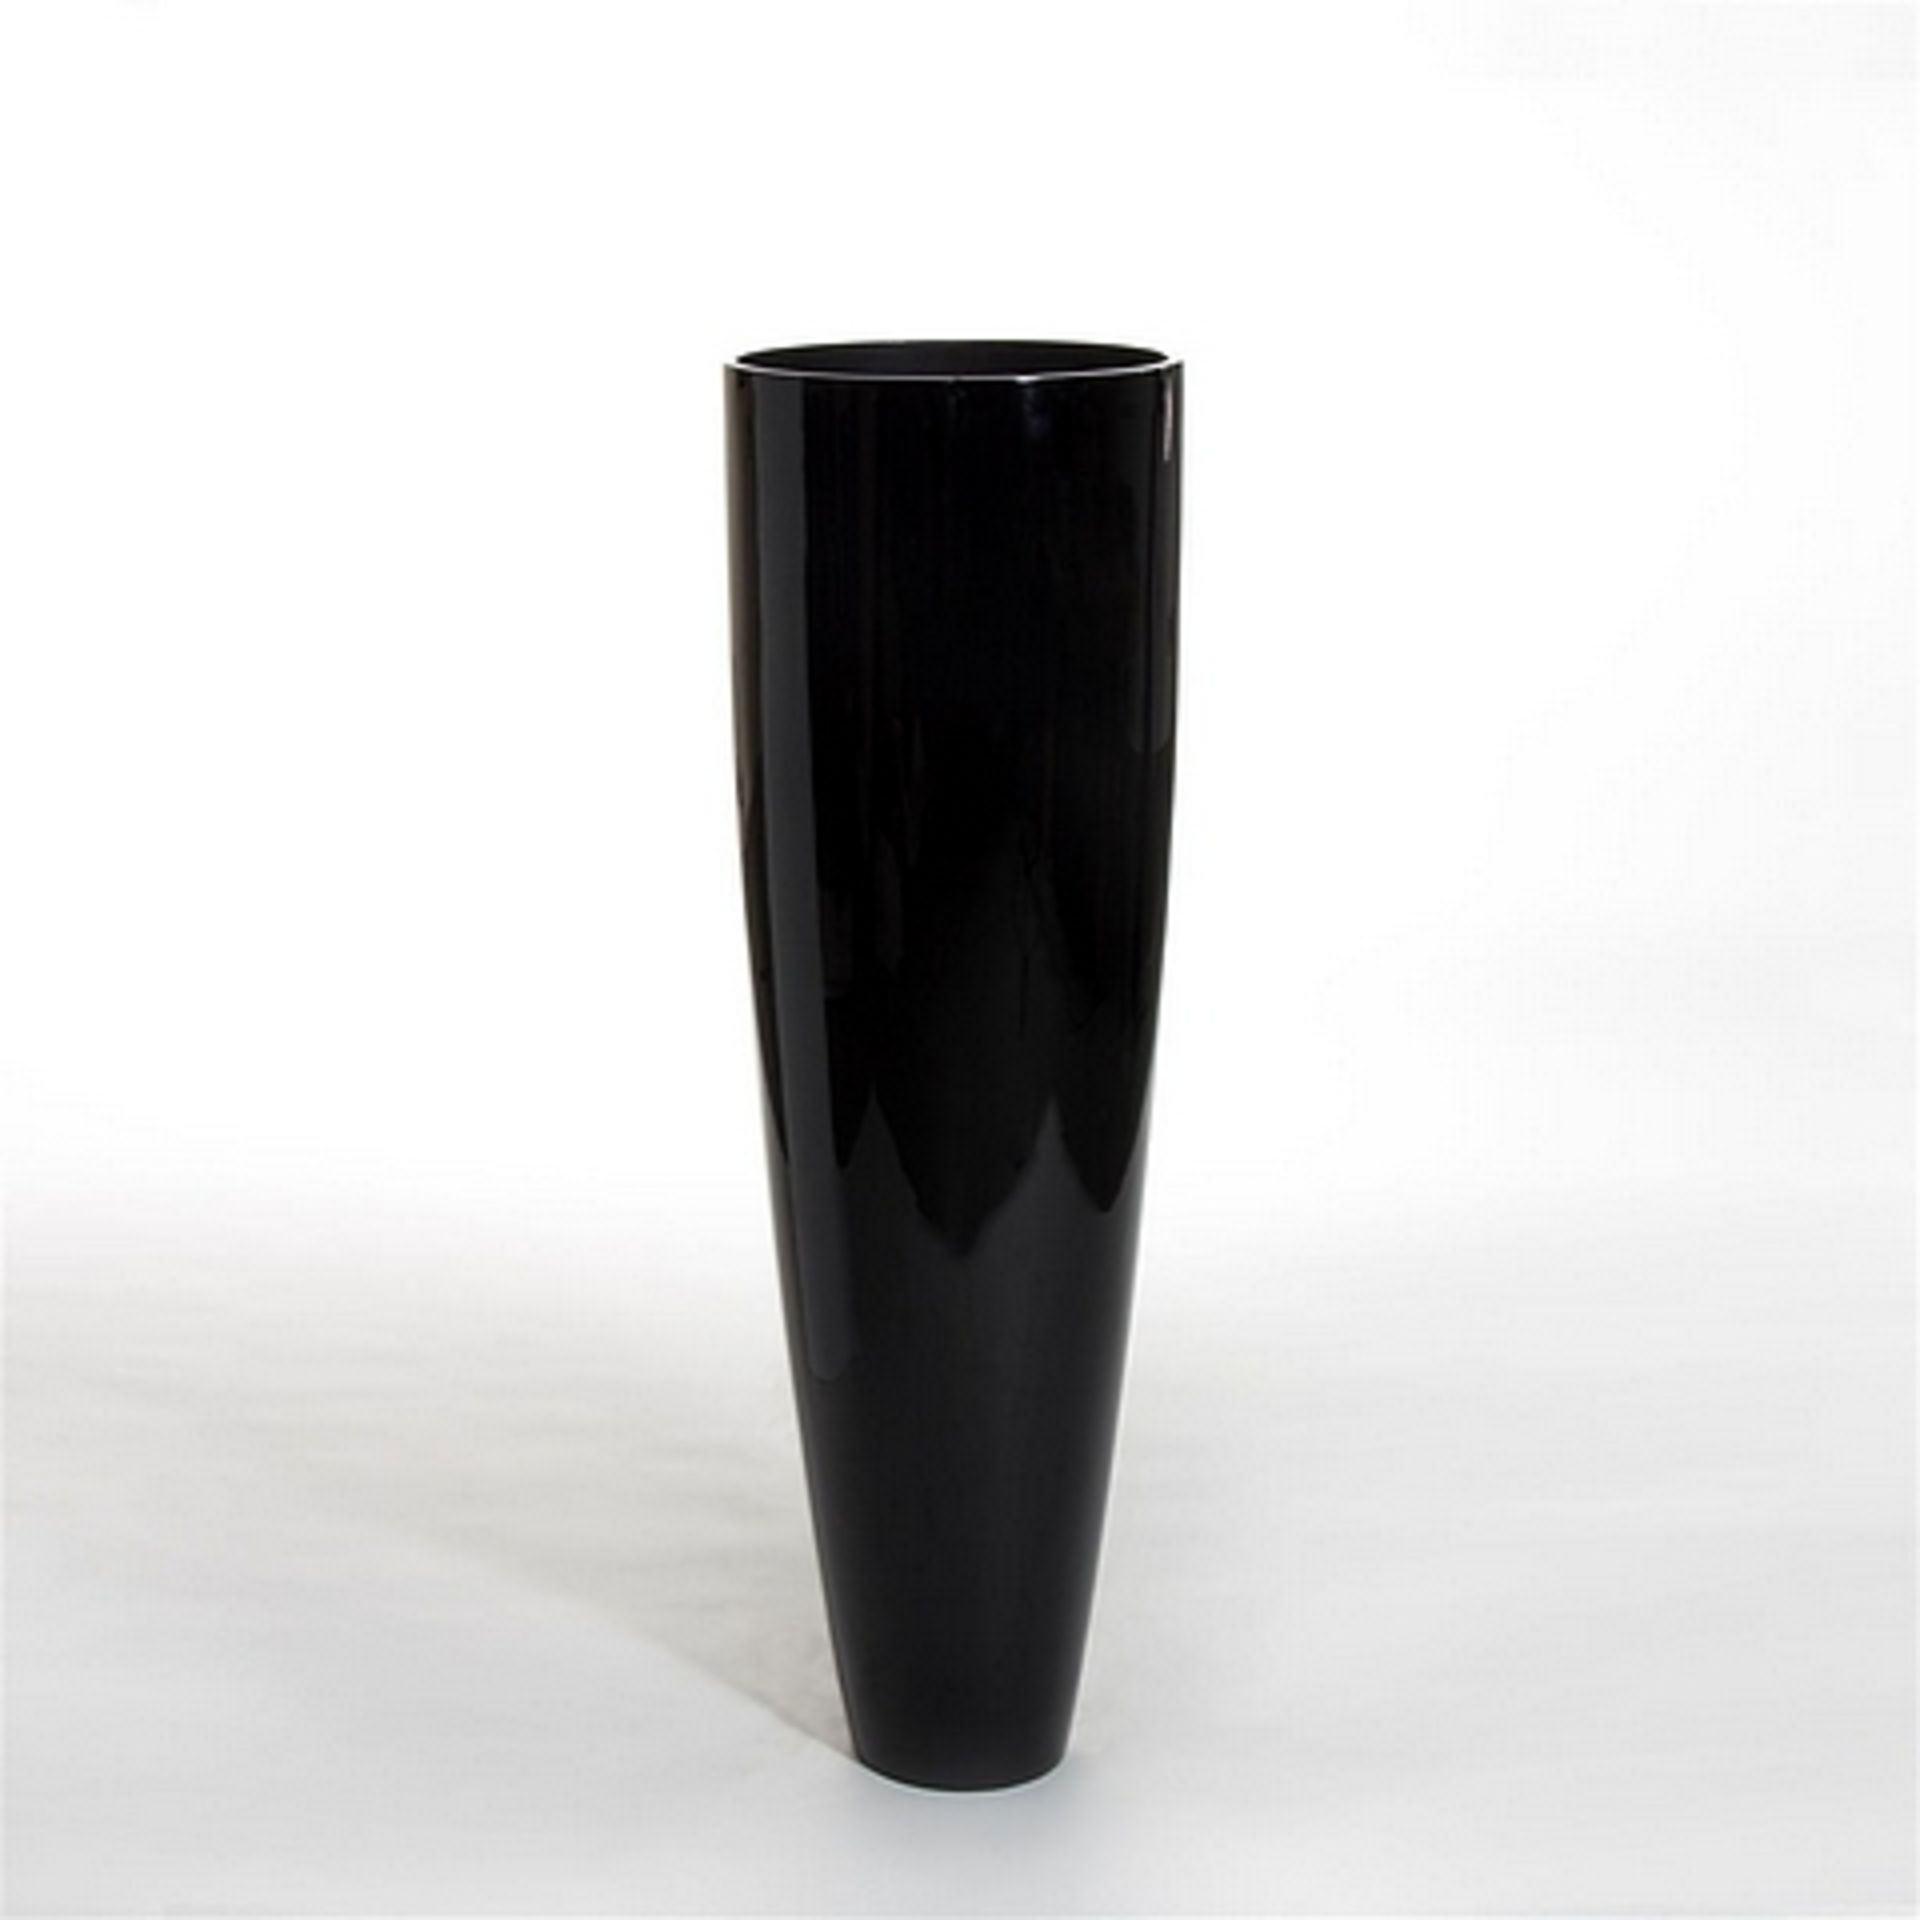 Vase closé black black lacquer. Solid block colour offering an expressive and inspired statement,